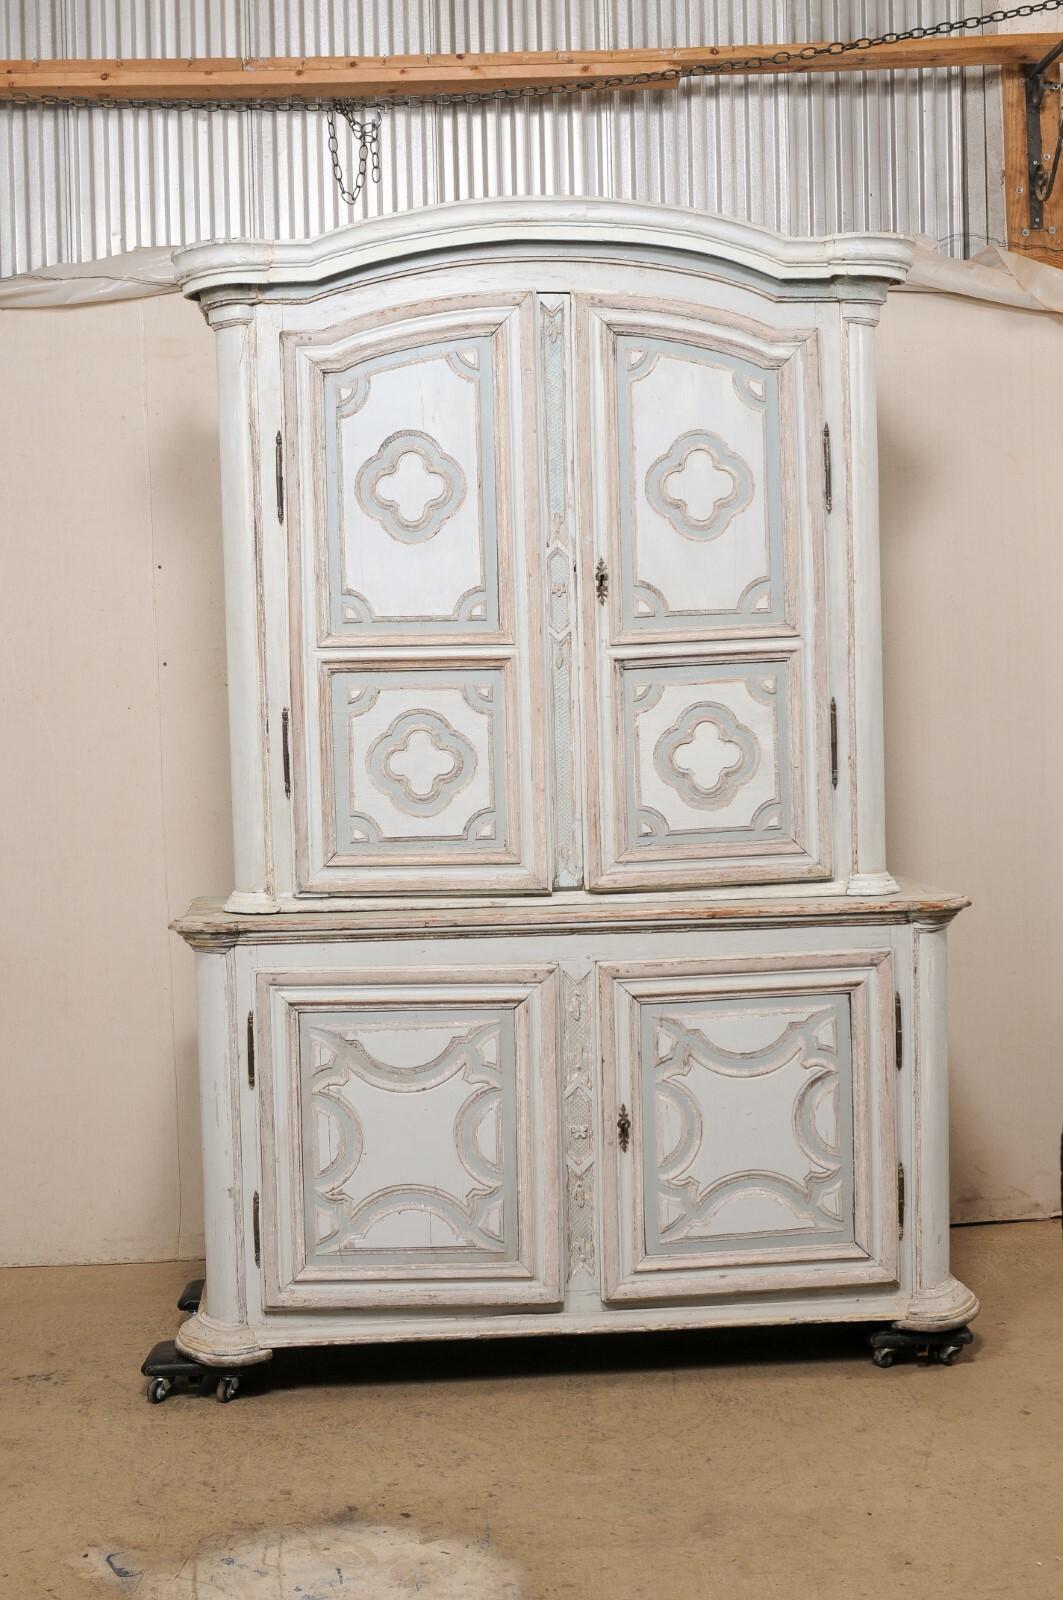 A large French carved and painted wood storage cabinet from the 18th century. This antique buffet à deux-corps from France features a thickly molded center top cornice with subtle arch center, atop the upper cabinet which houses a pair of upper